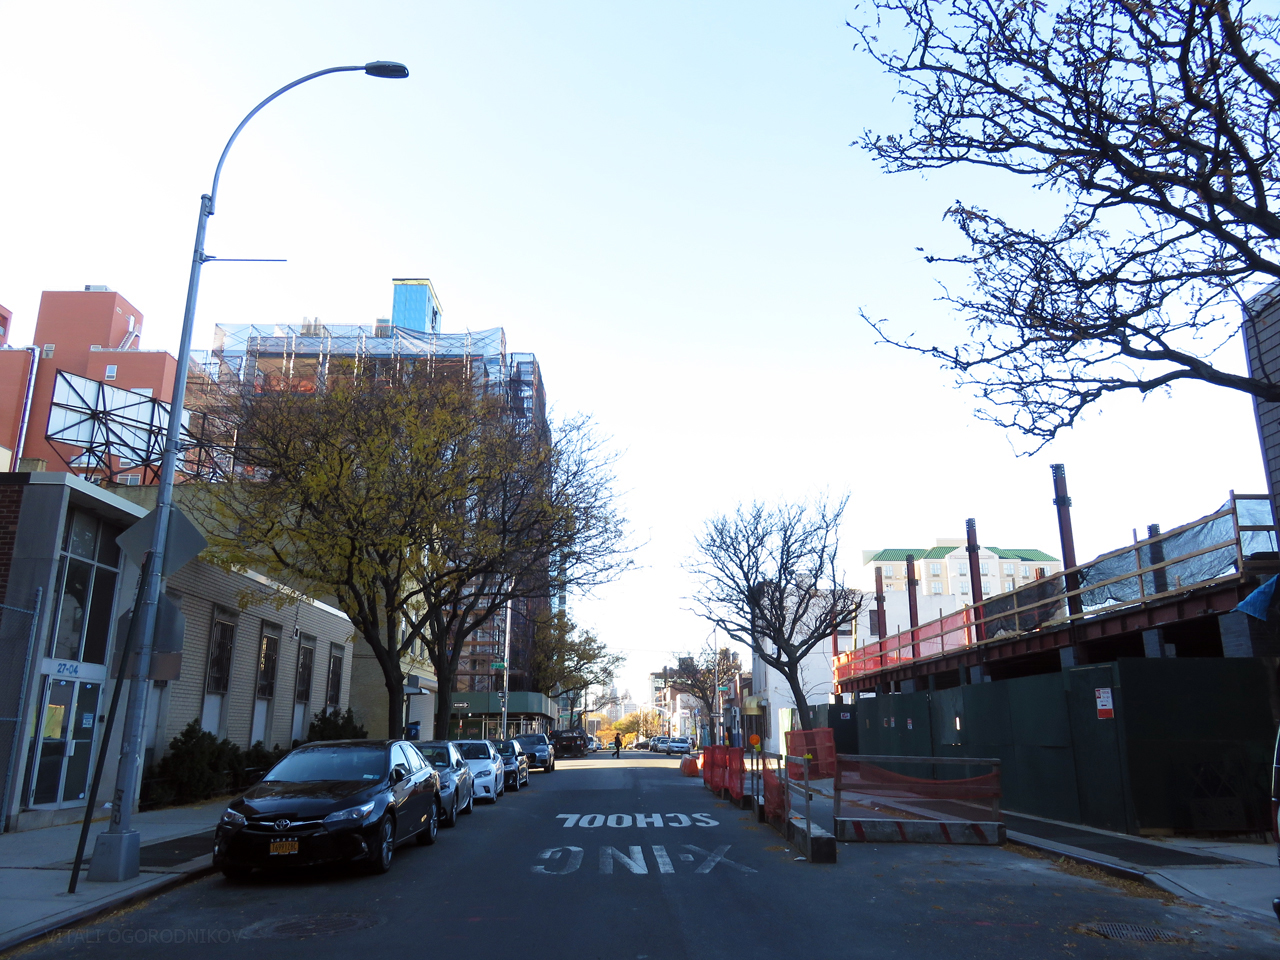 Looking northwest along 41st Avenue. The Queens Boro Tower is under construction on the left.